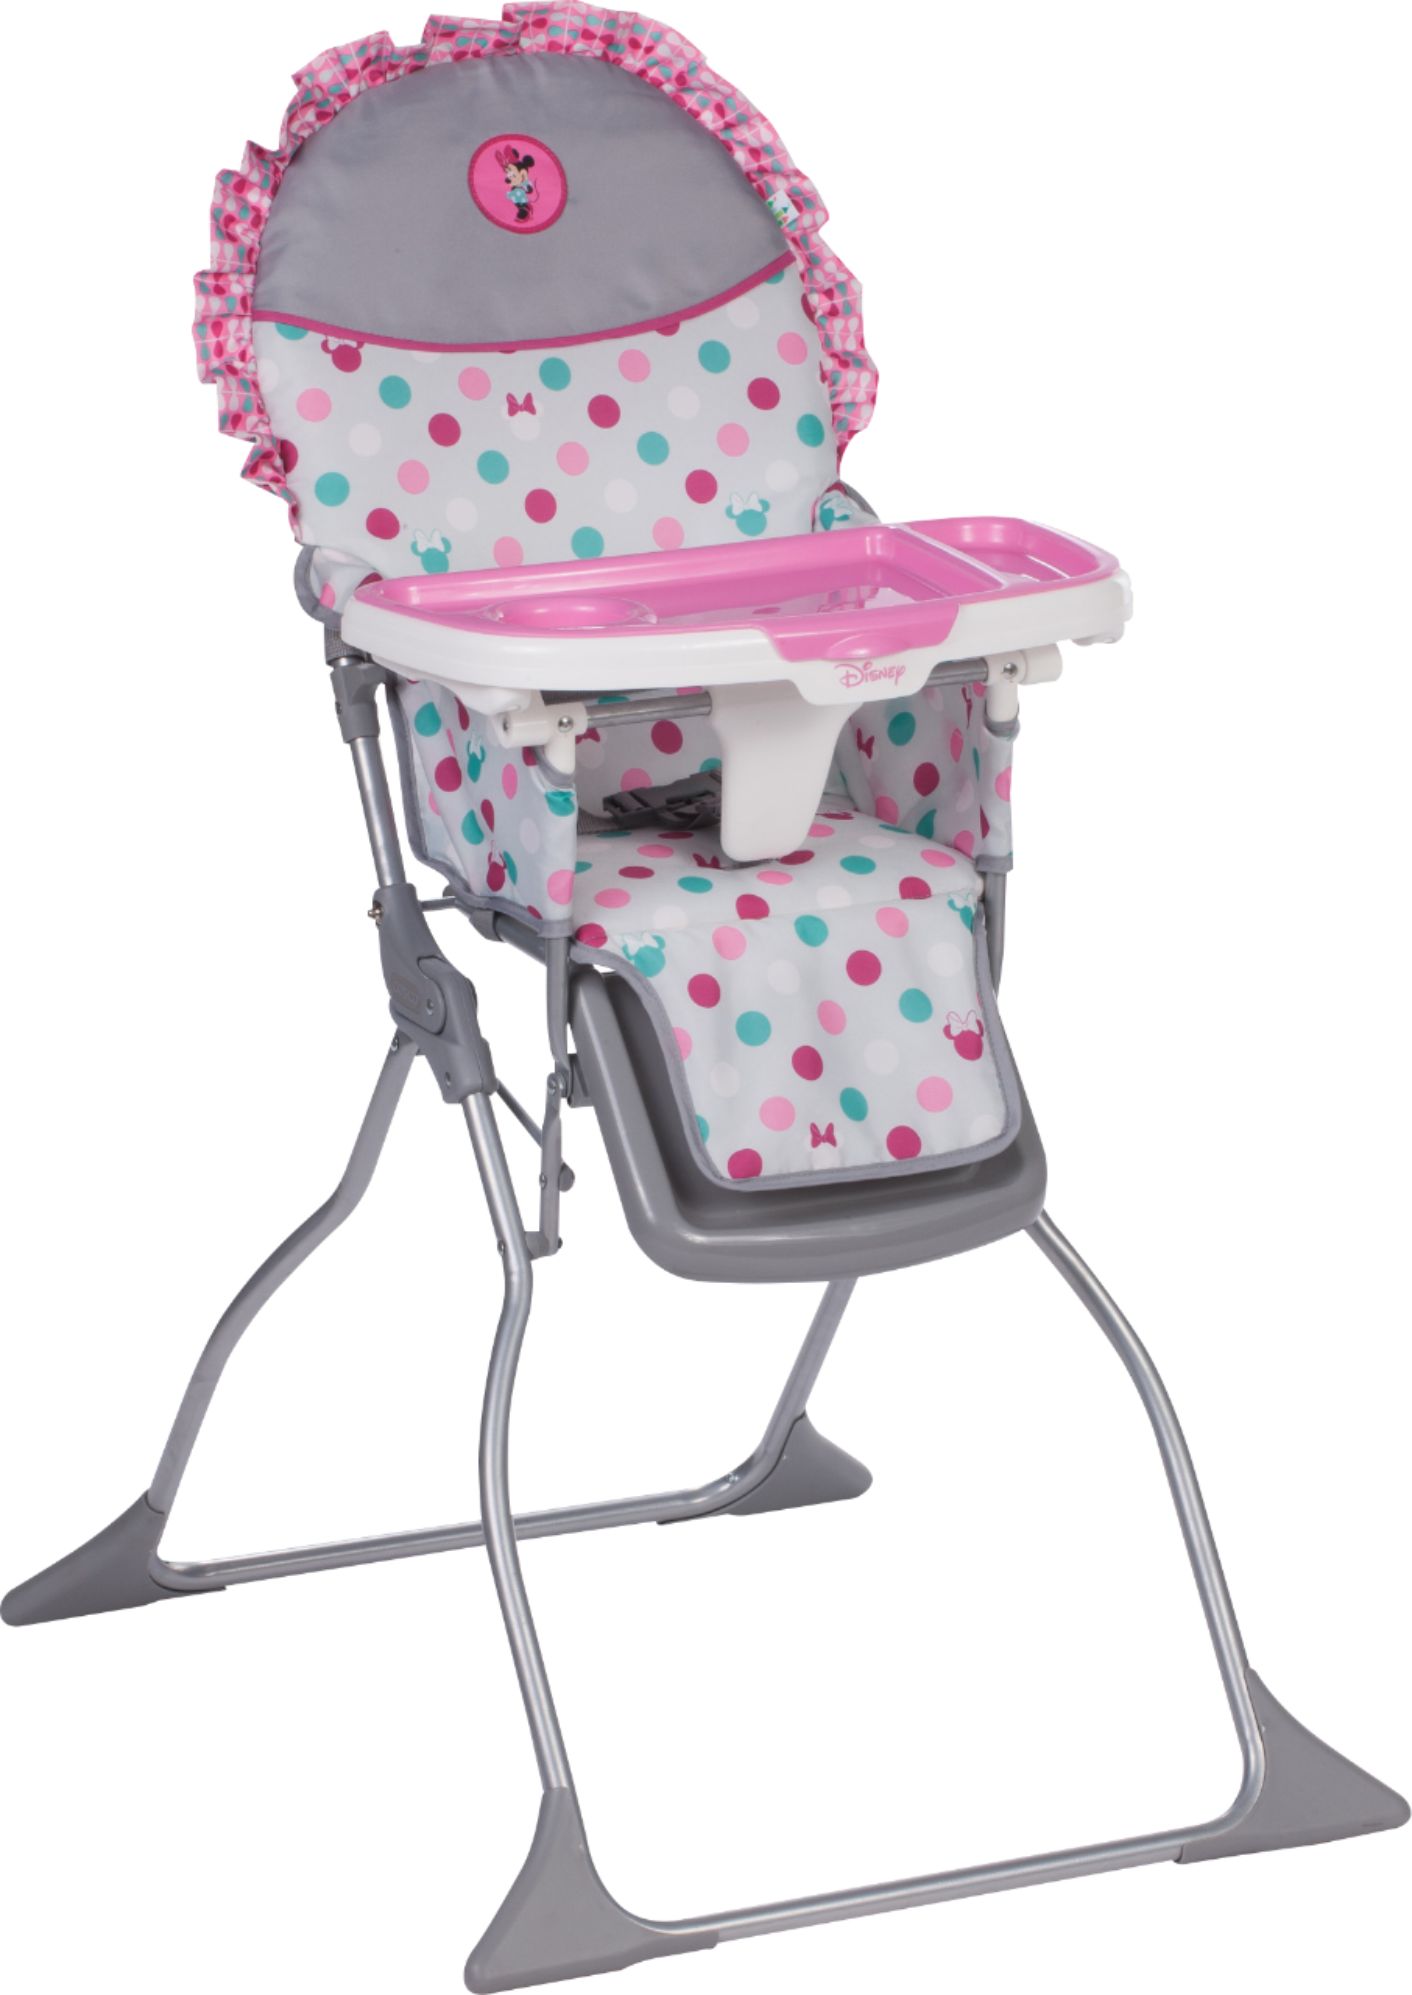 Angle View: Graco® Table2Table™ Premier Fold 7-in-1 High Chair, Tatum